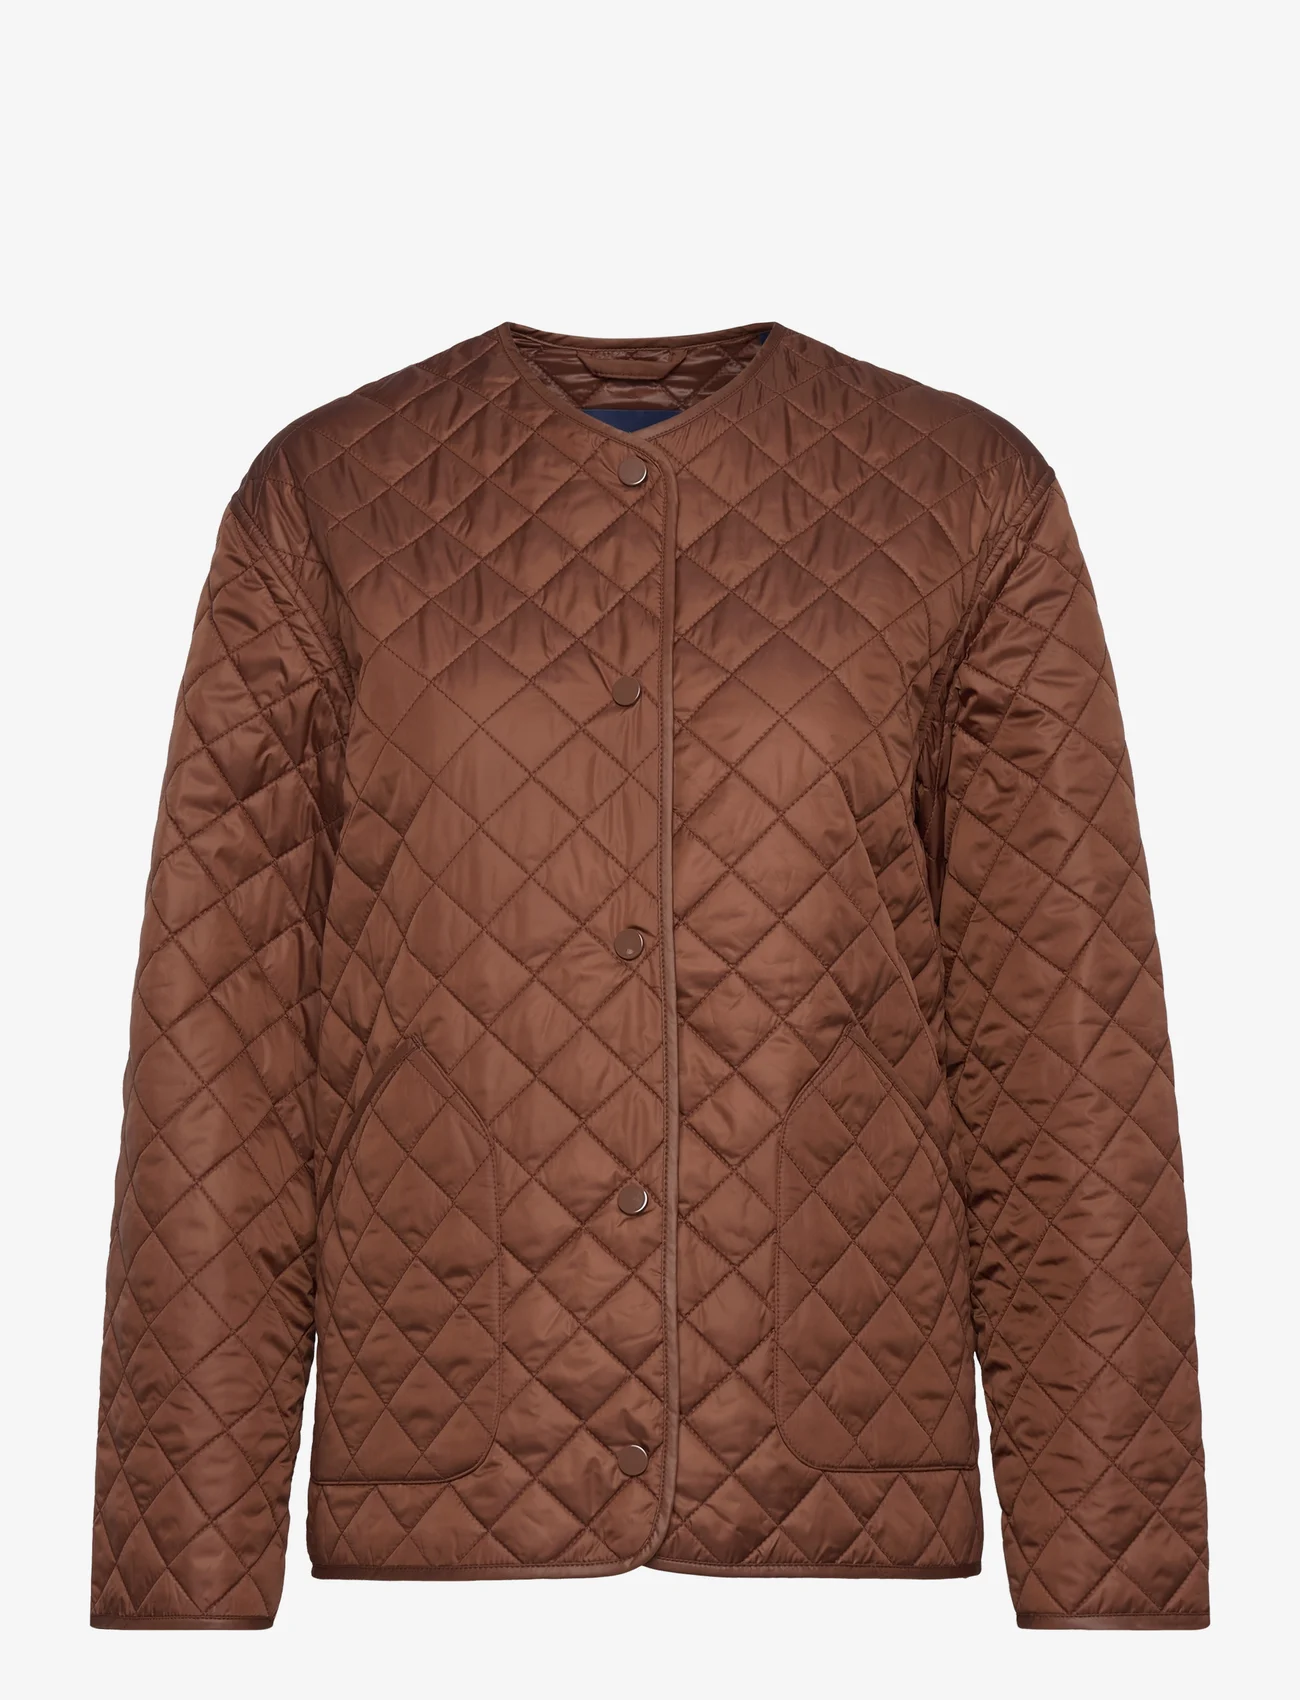 GANT - D2. QUILTED JACKET - quilted jackets - mahogany brown - 0